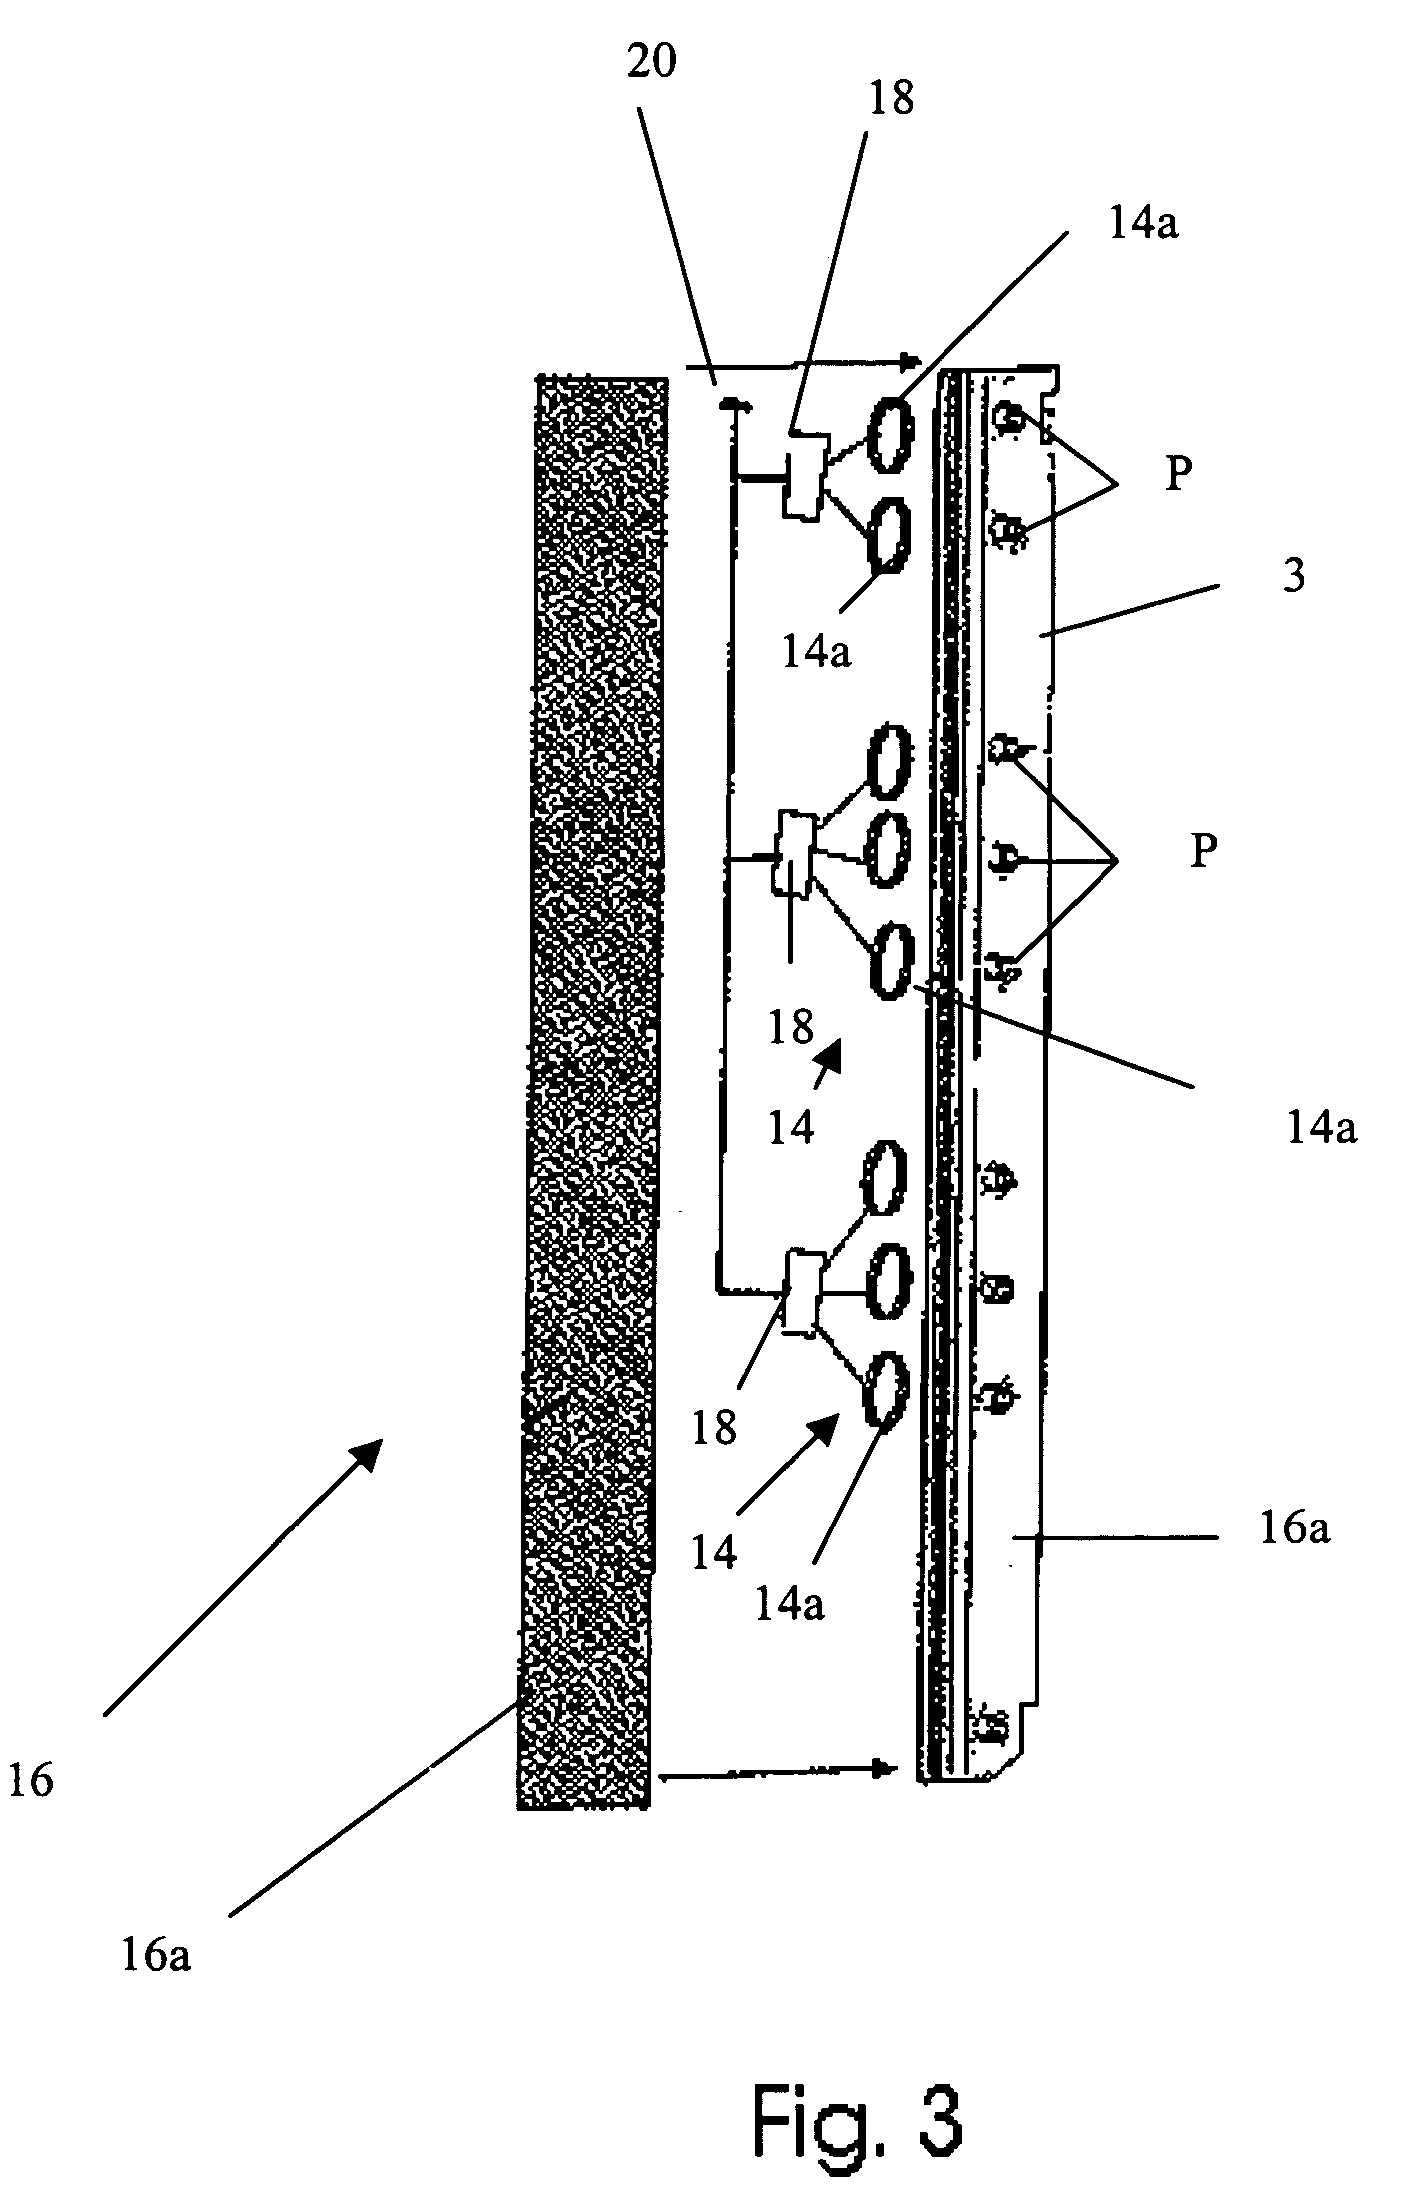 Refrigerator with internal compartment divisible into independent temperature zones